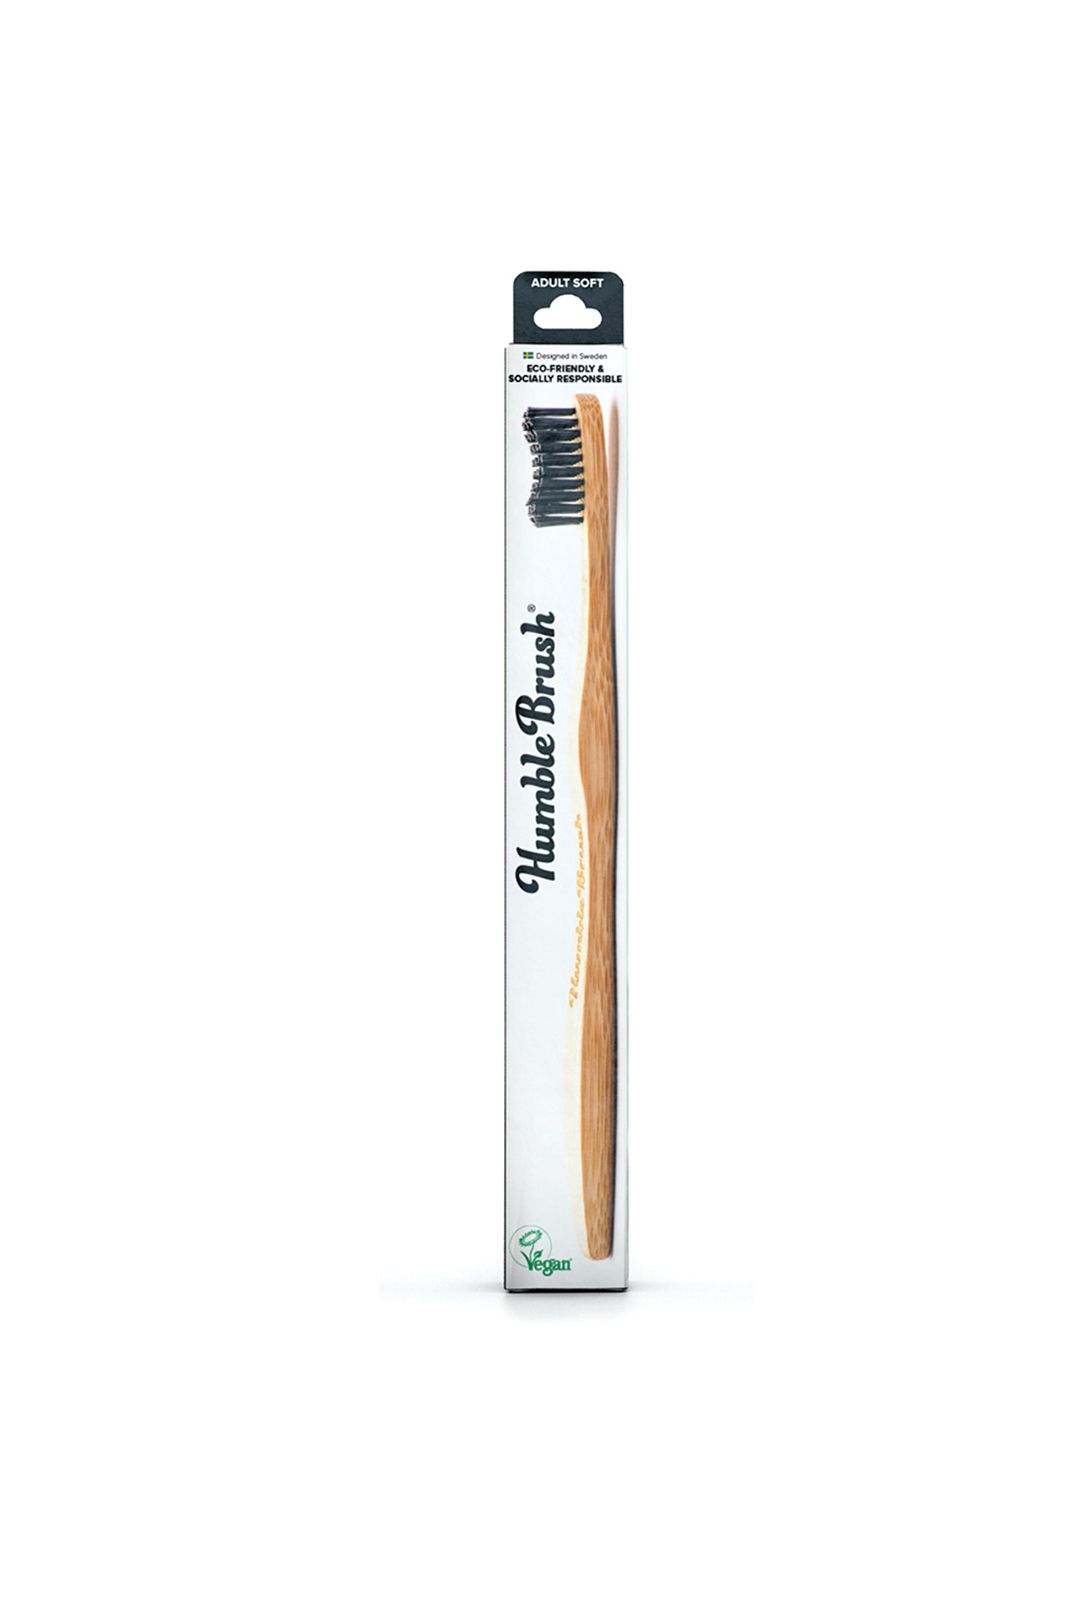 the-humble-co-toothbrush-bamboo-adult-soft-black